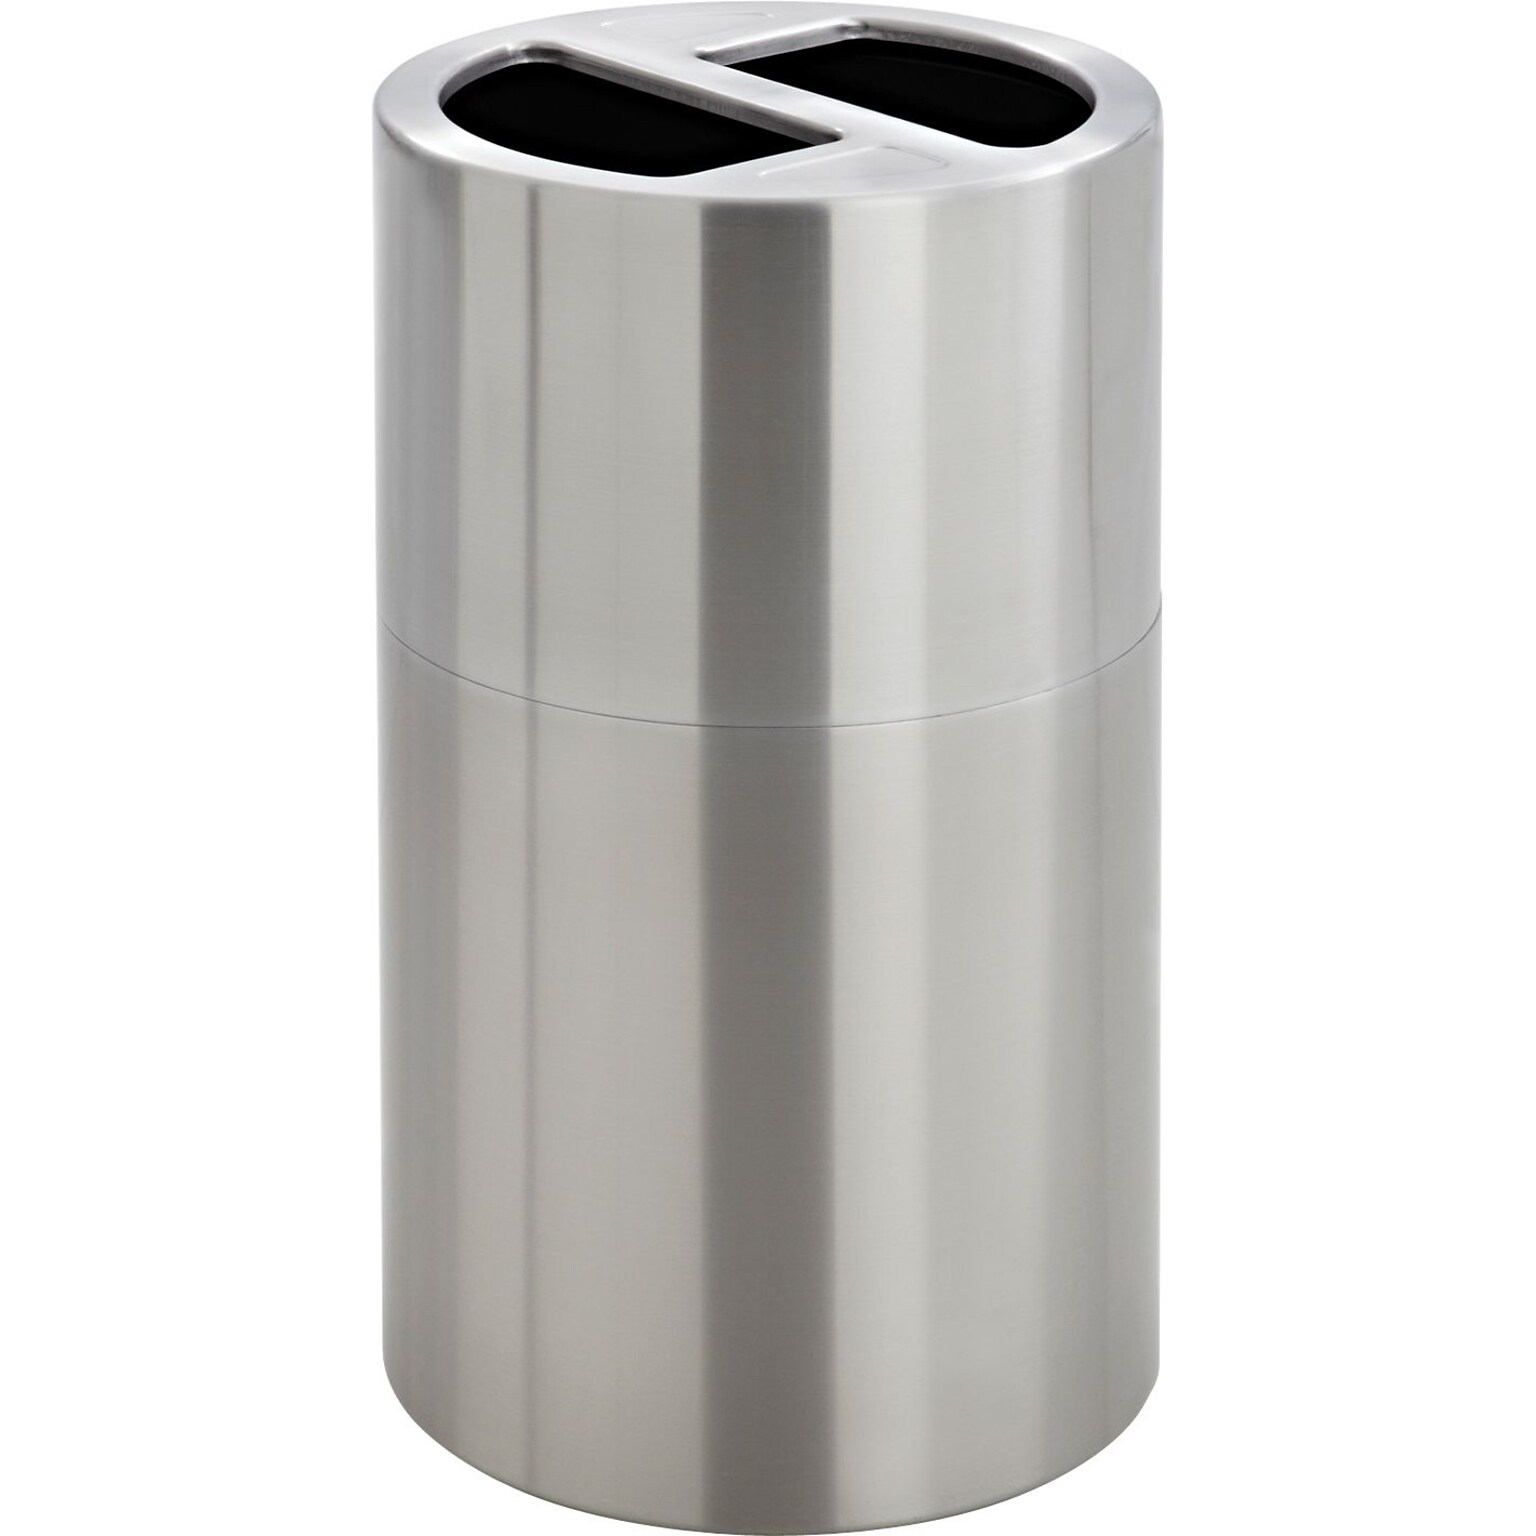 Safco Dual Recycling Receptacle Steel Trash Can with no Lid, Satin Stainless, 30.1 gal. (9931SS)